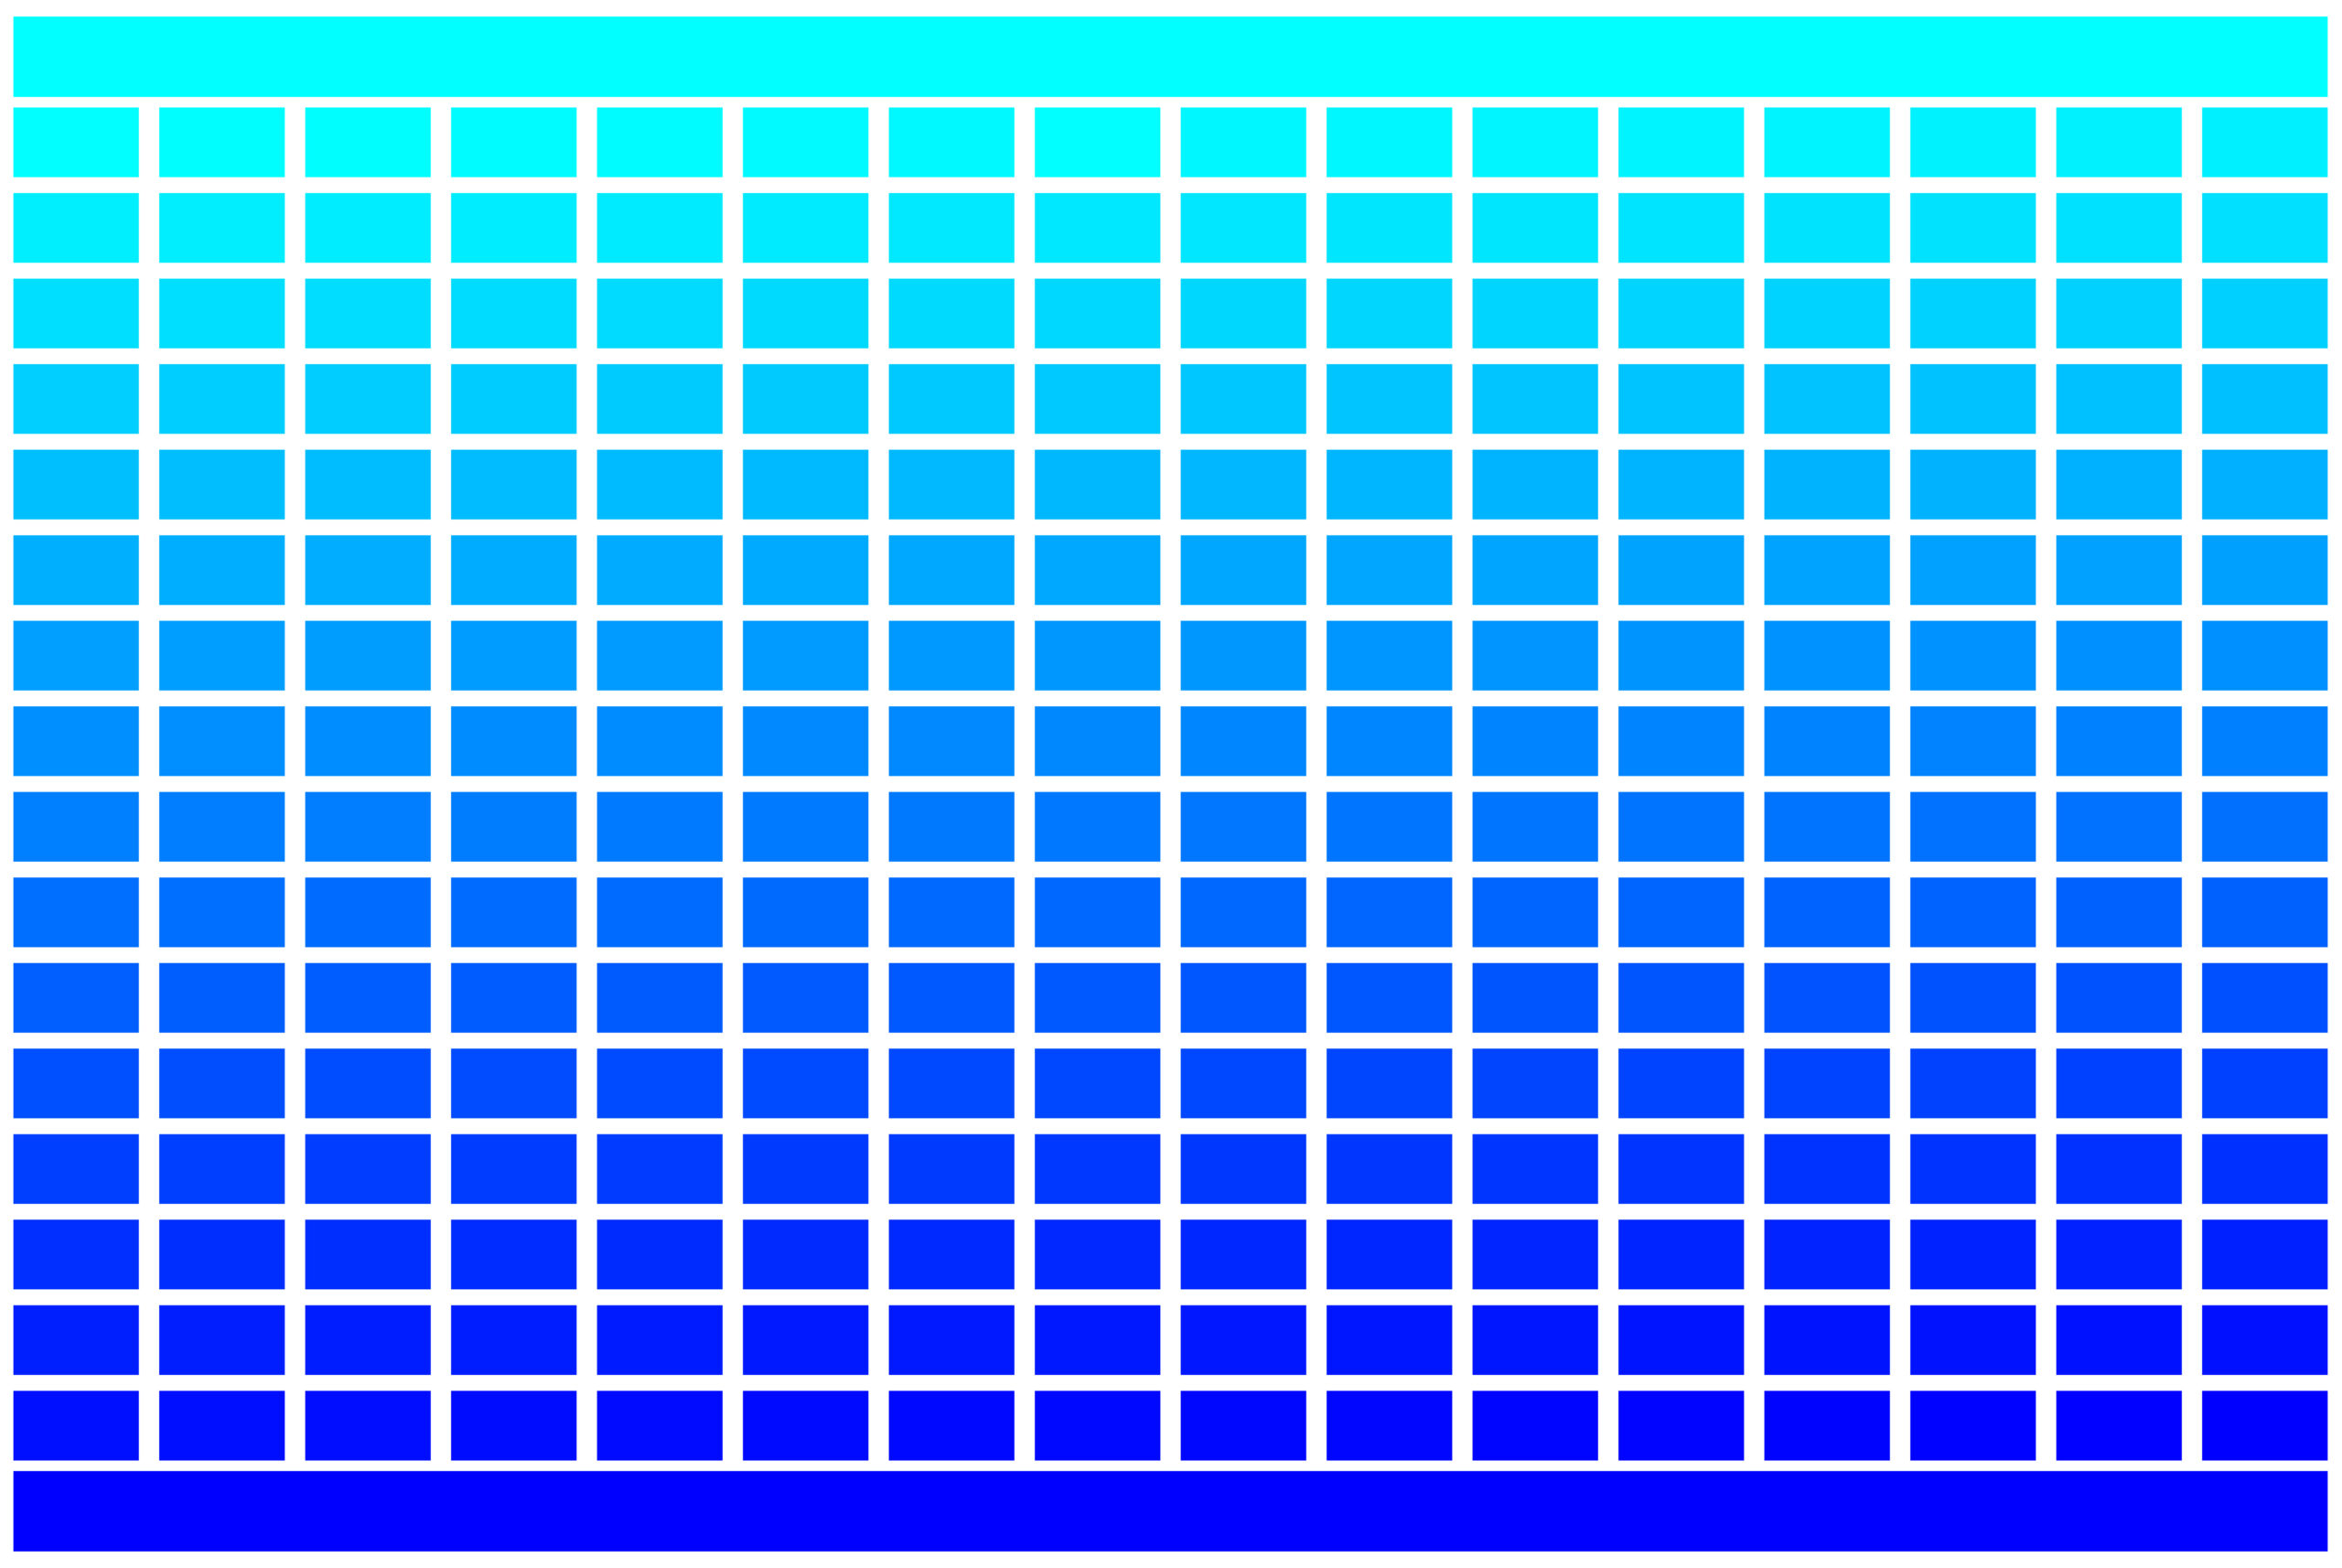 https://lightcolourvision.org/wp-content/uploads/15000-0-A-W-EN-RGB-Colour-Picker-Cyan-to-Blue-Grid-80-scaled.jpg